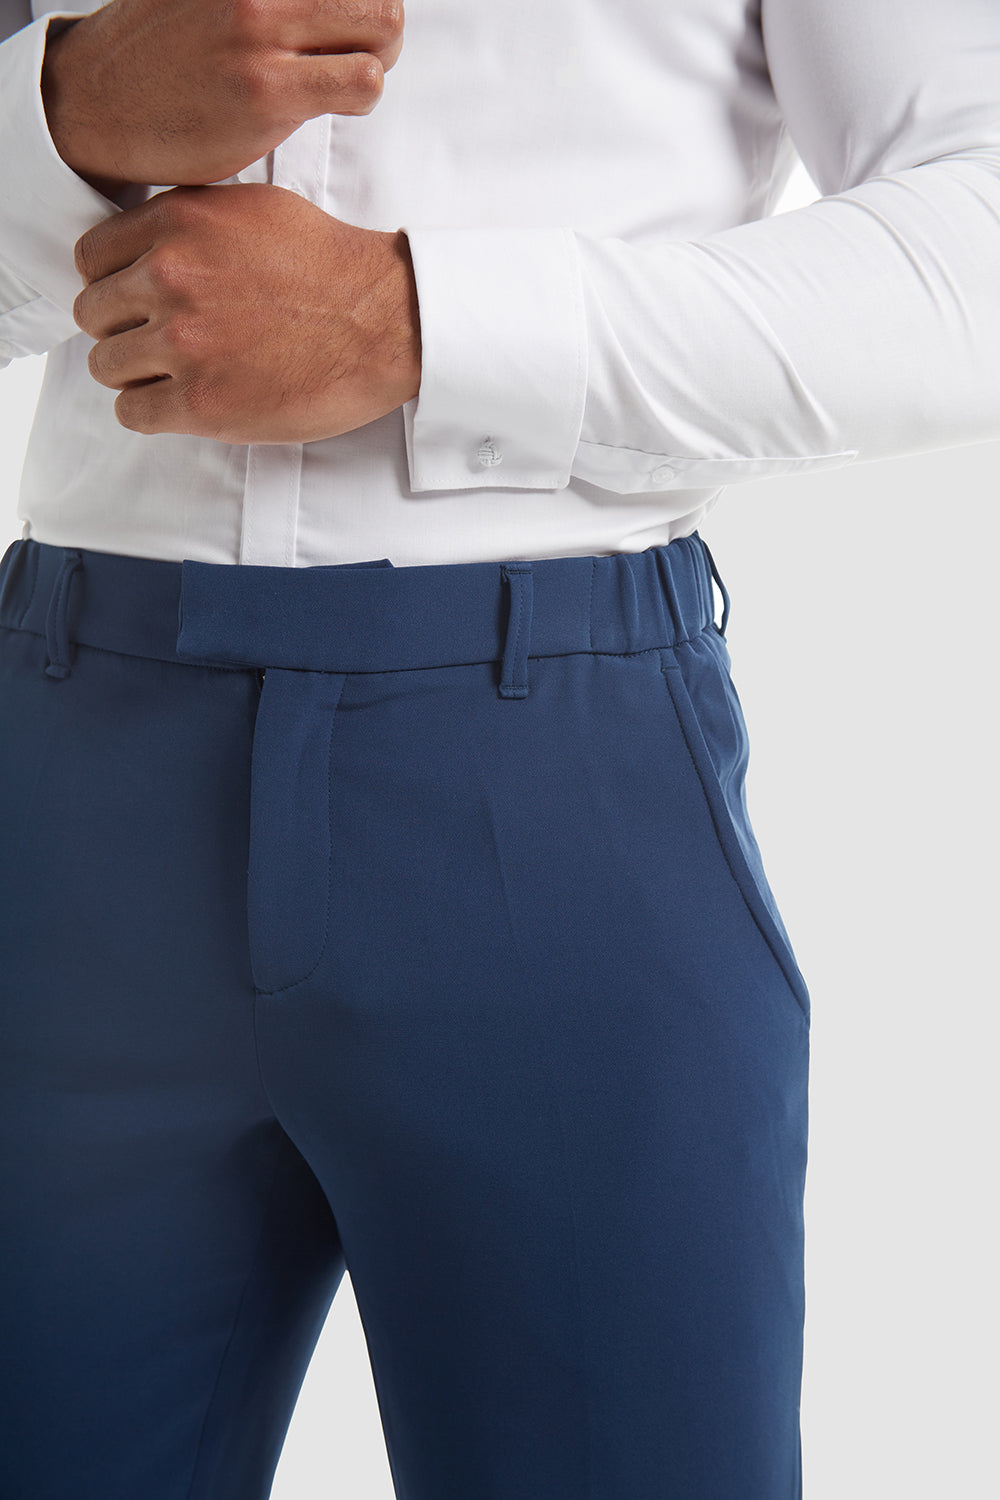 Help with how Trouser Seat Should Fit | Men's Clothing Forums